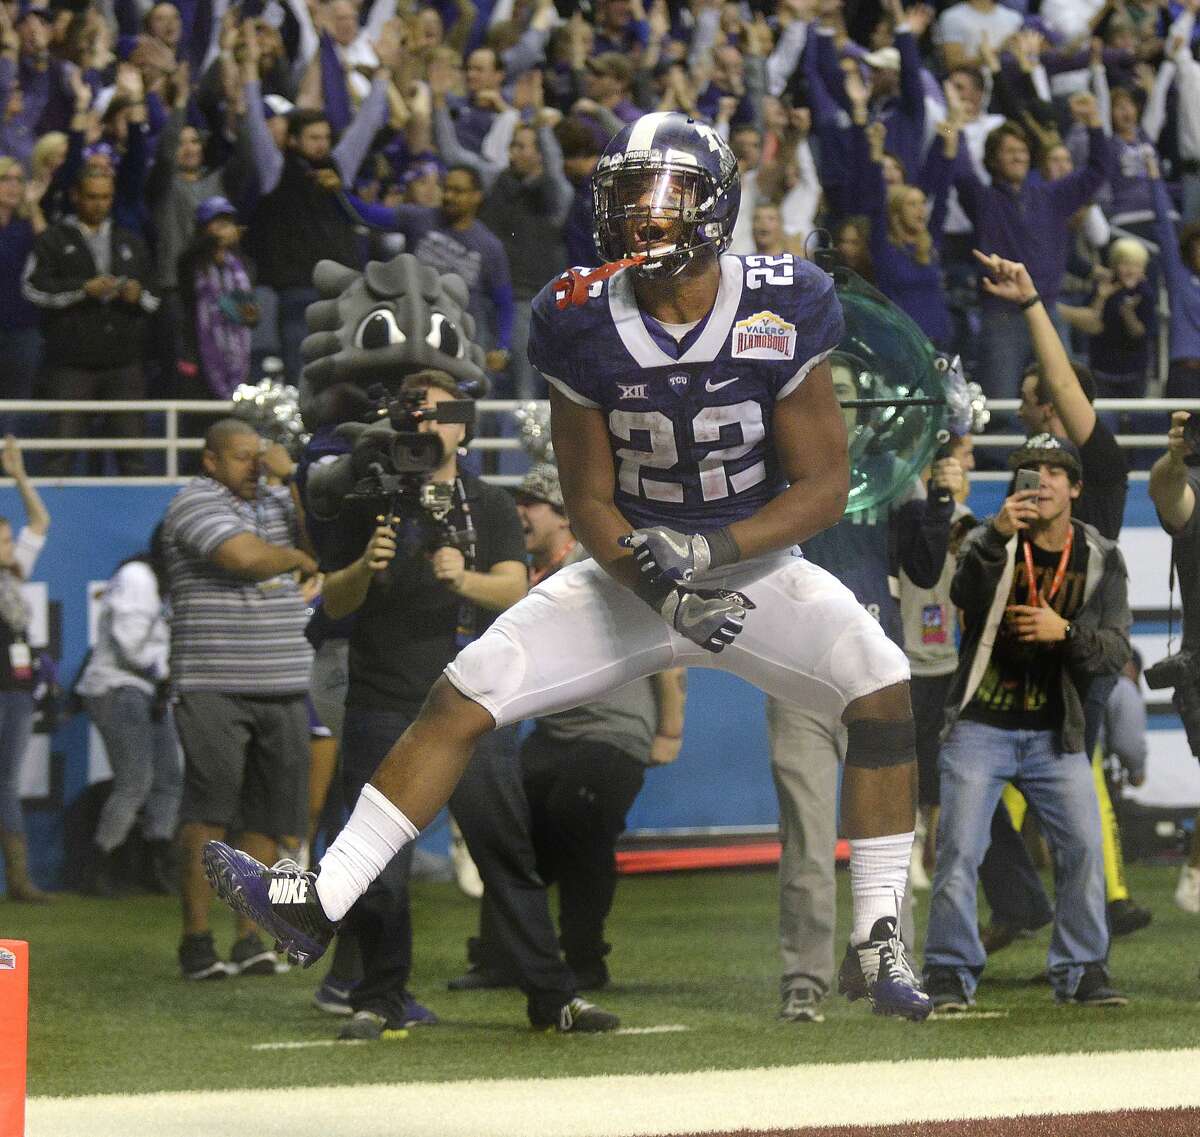 TCU running back Aaron Green celebrates after scoring a touchdown with just over three minutes to go in the fourth quarter at the Valero Alamo Bowl Saturday, Jan. 2, 2015. >>> Click through for a look at the San Antonio AAF roster so far >>>